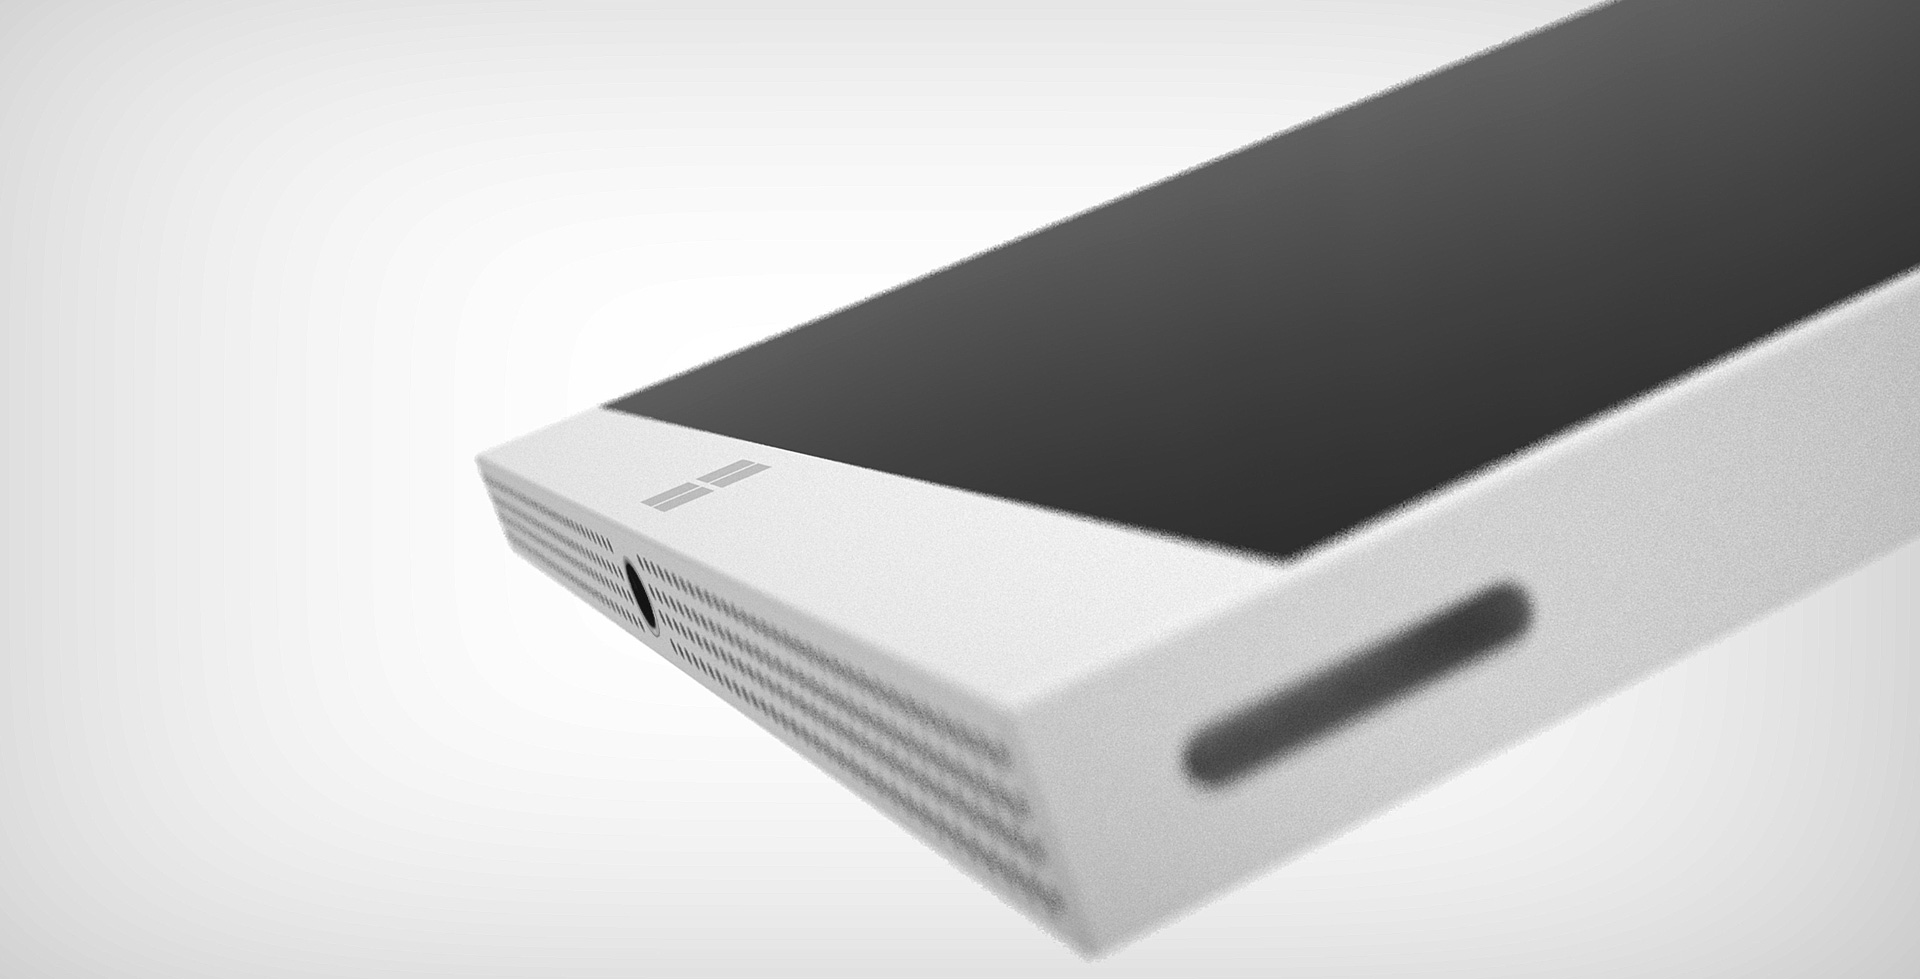 surface phone concept